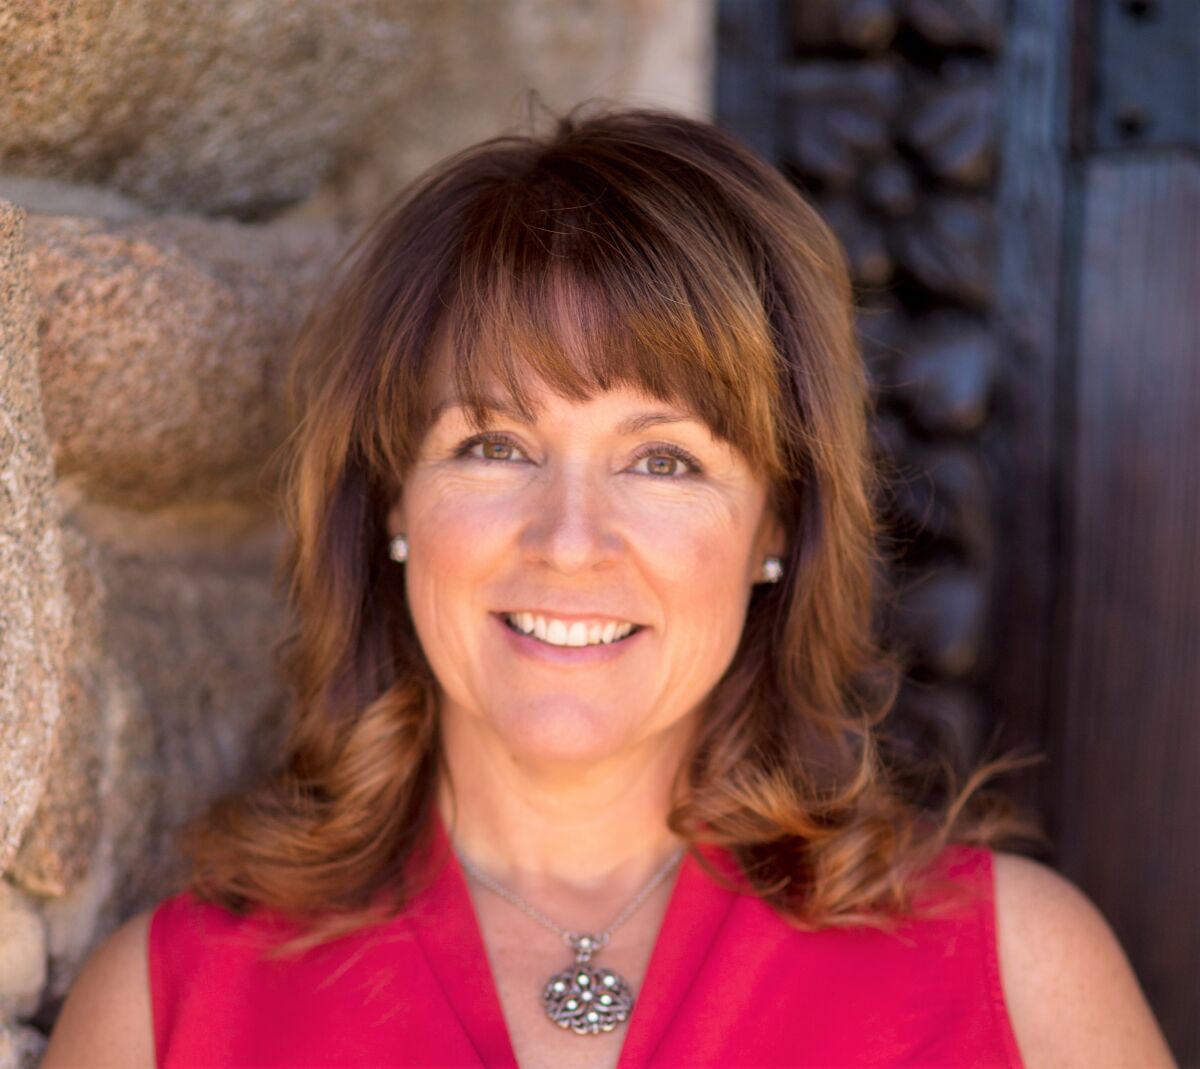 Karen Domnitz is a director of the Ramona Real Estate Association and a Realtor with Century 21